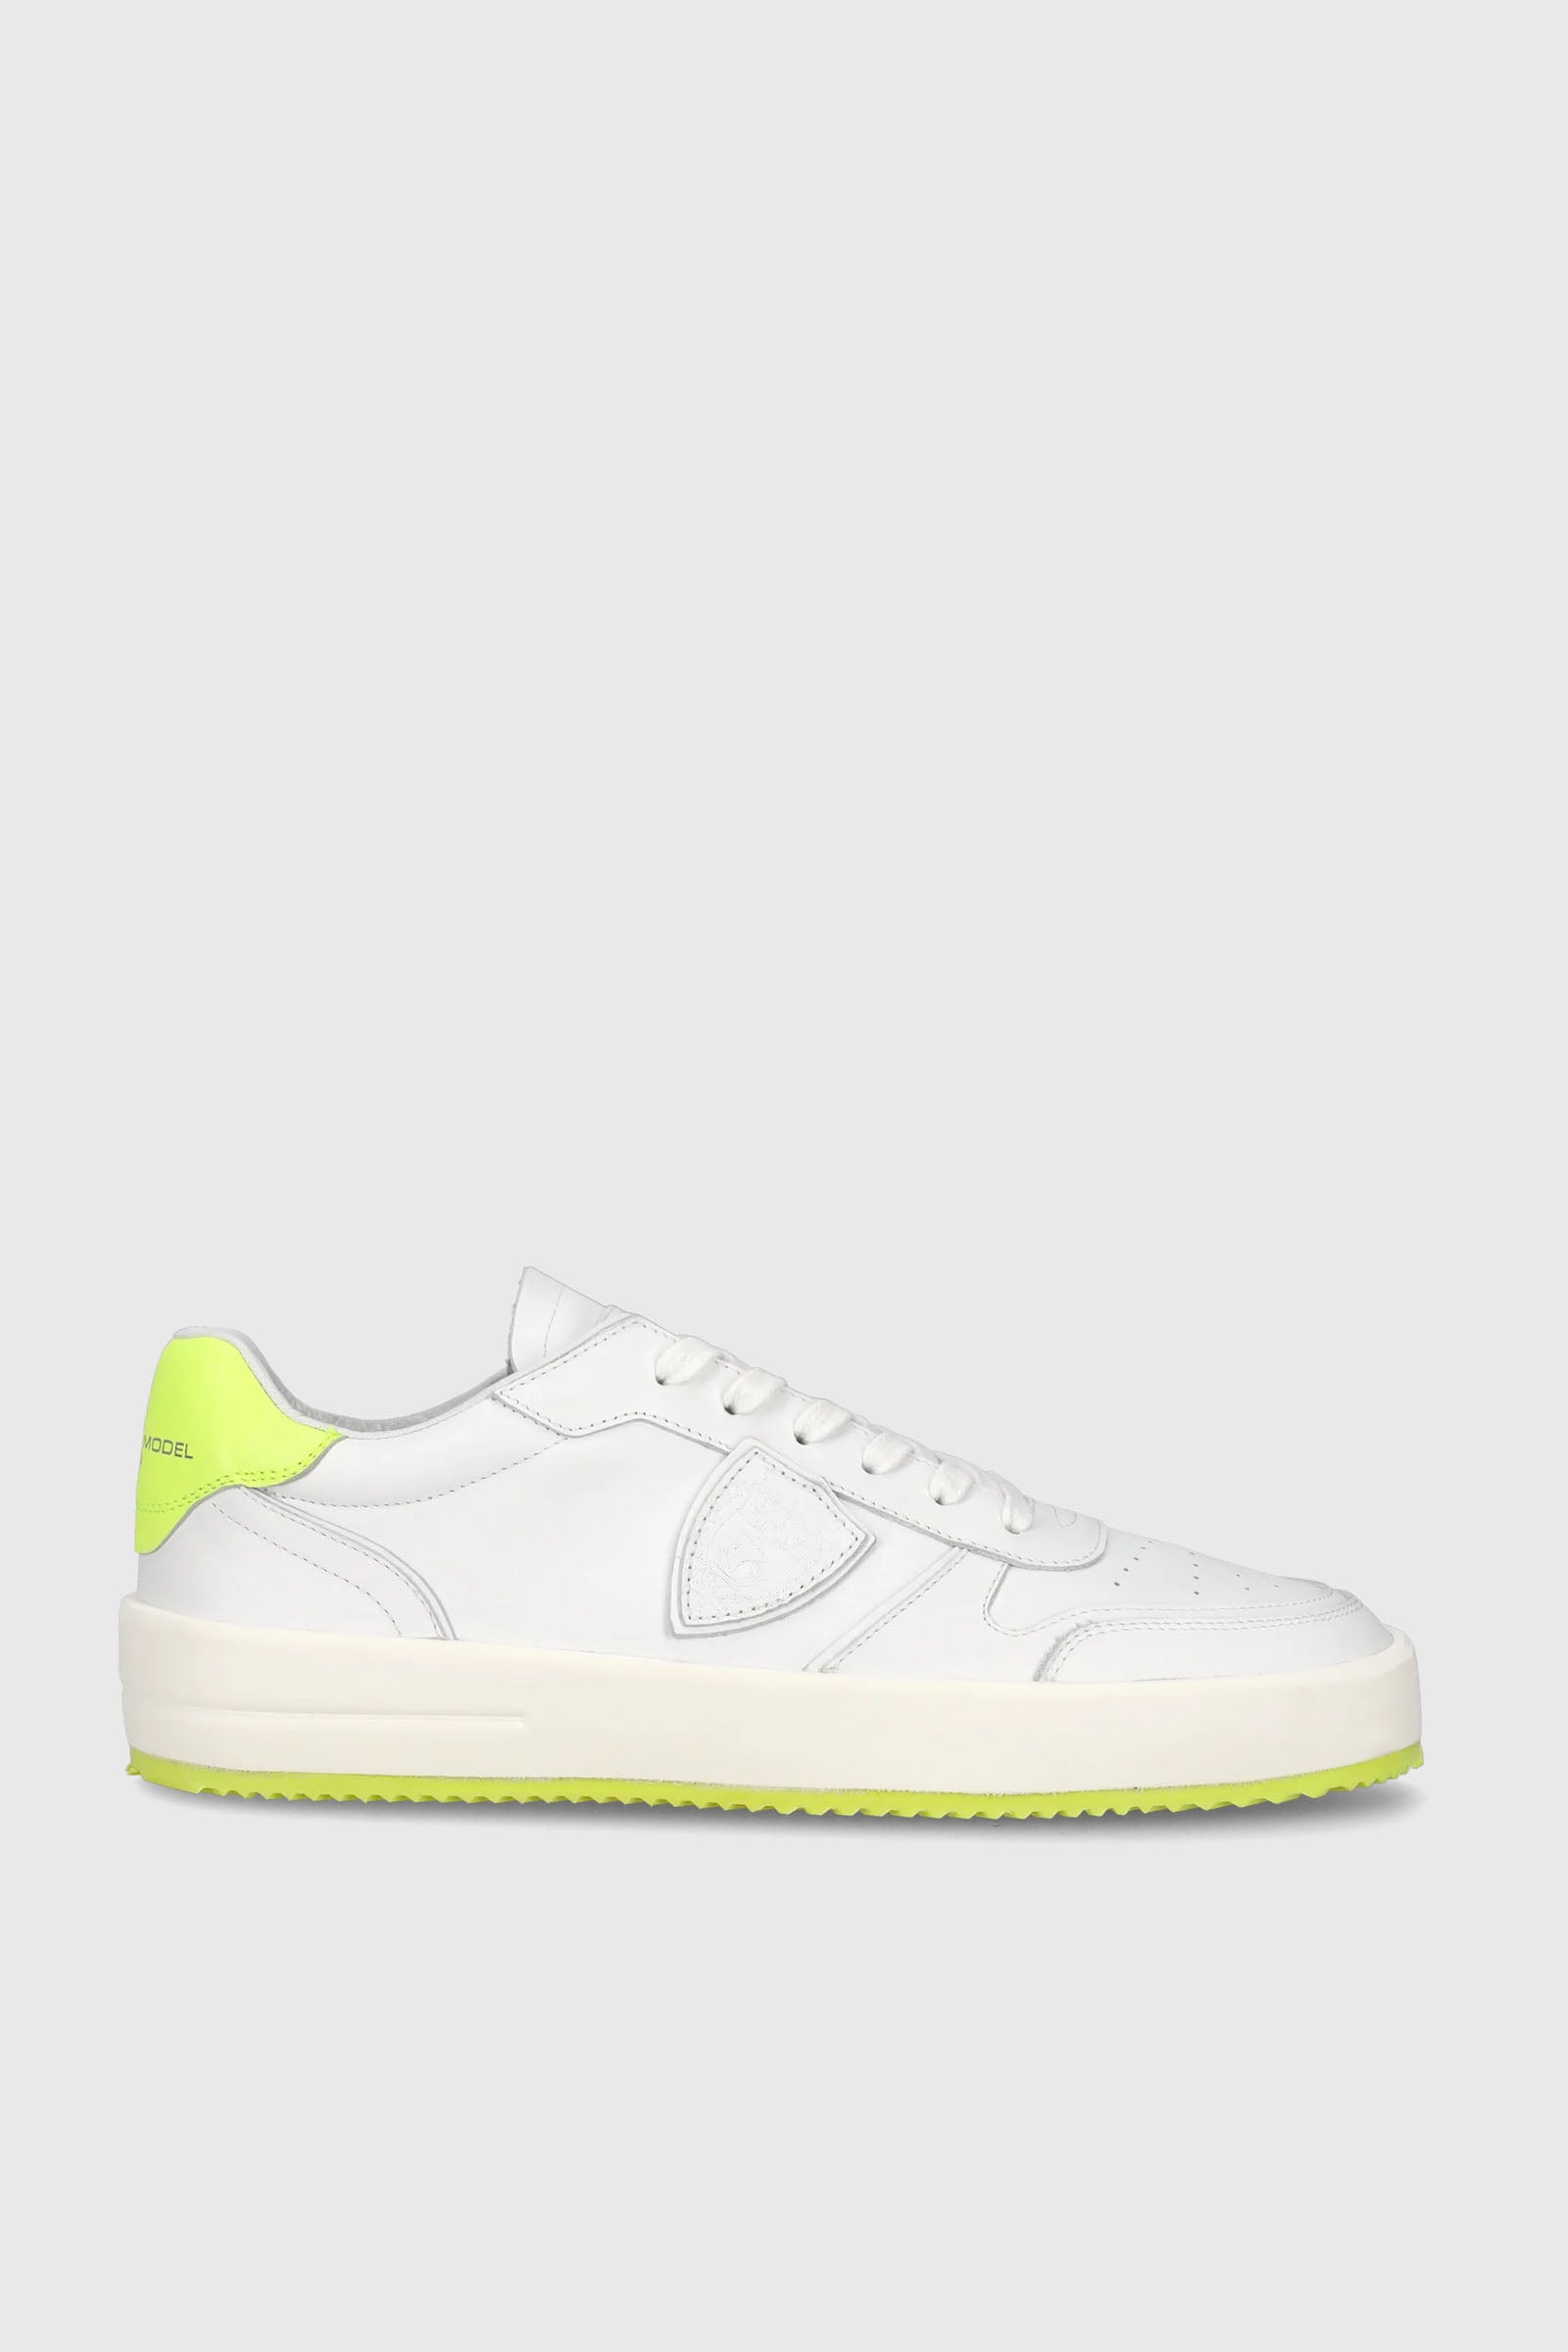 Philippe Model Sneaker Nice Veau Leather White/Yellow Fluo - 1